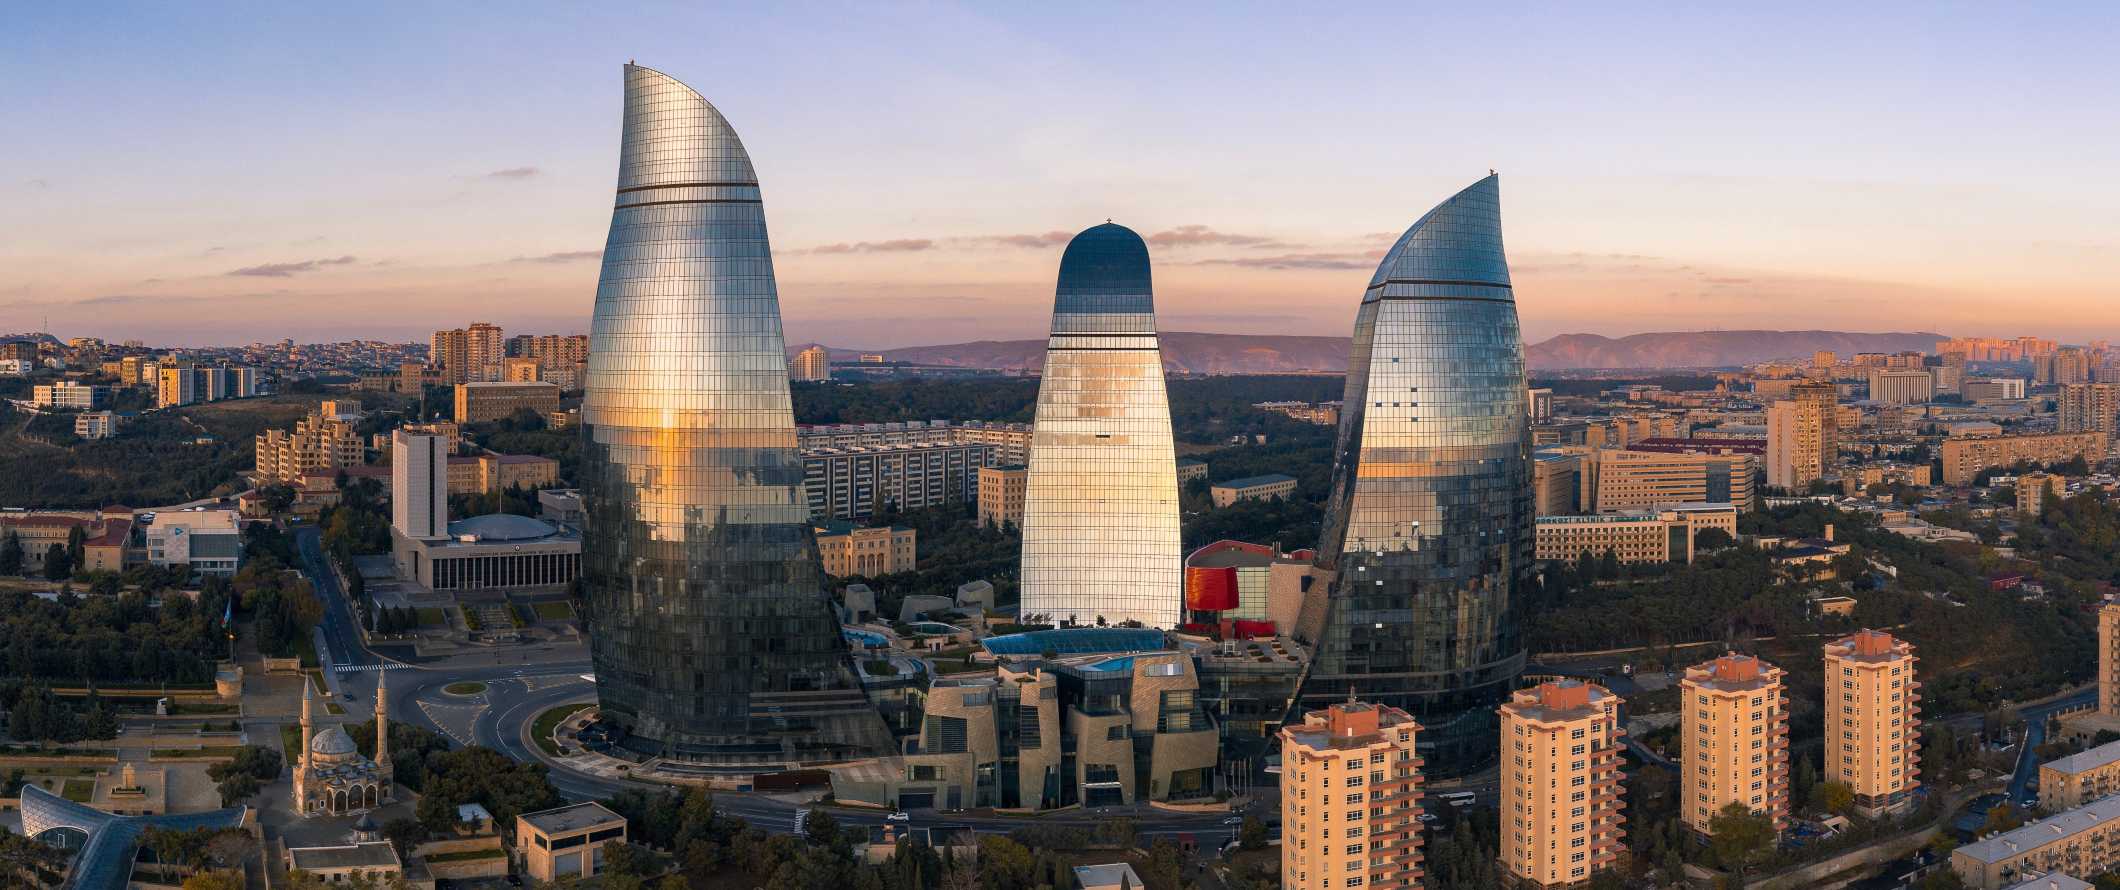 The towering Flame Towers in Baku, Azerbaijan overlooking the city at sunset